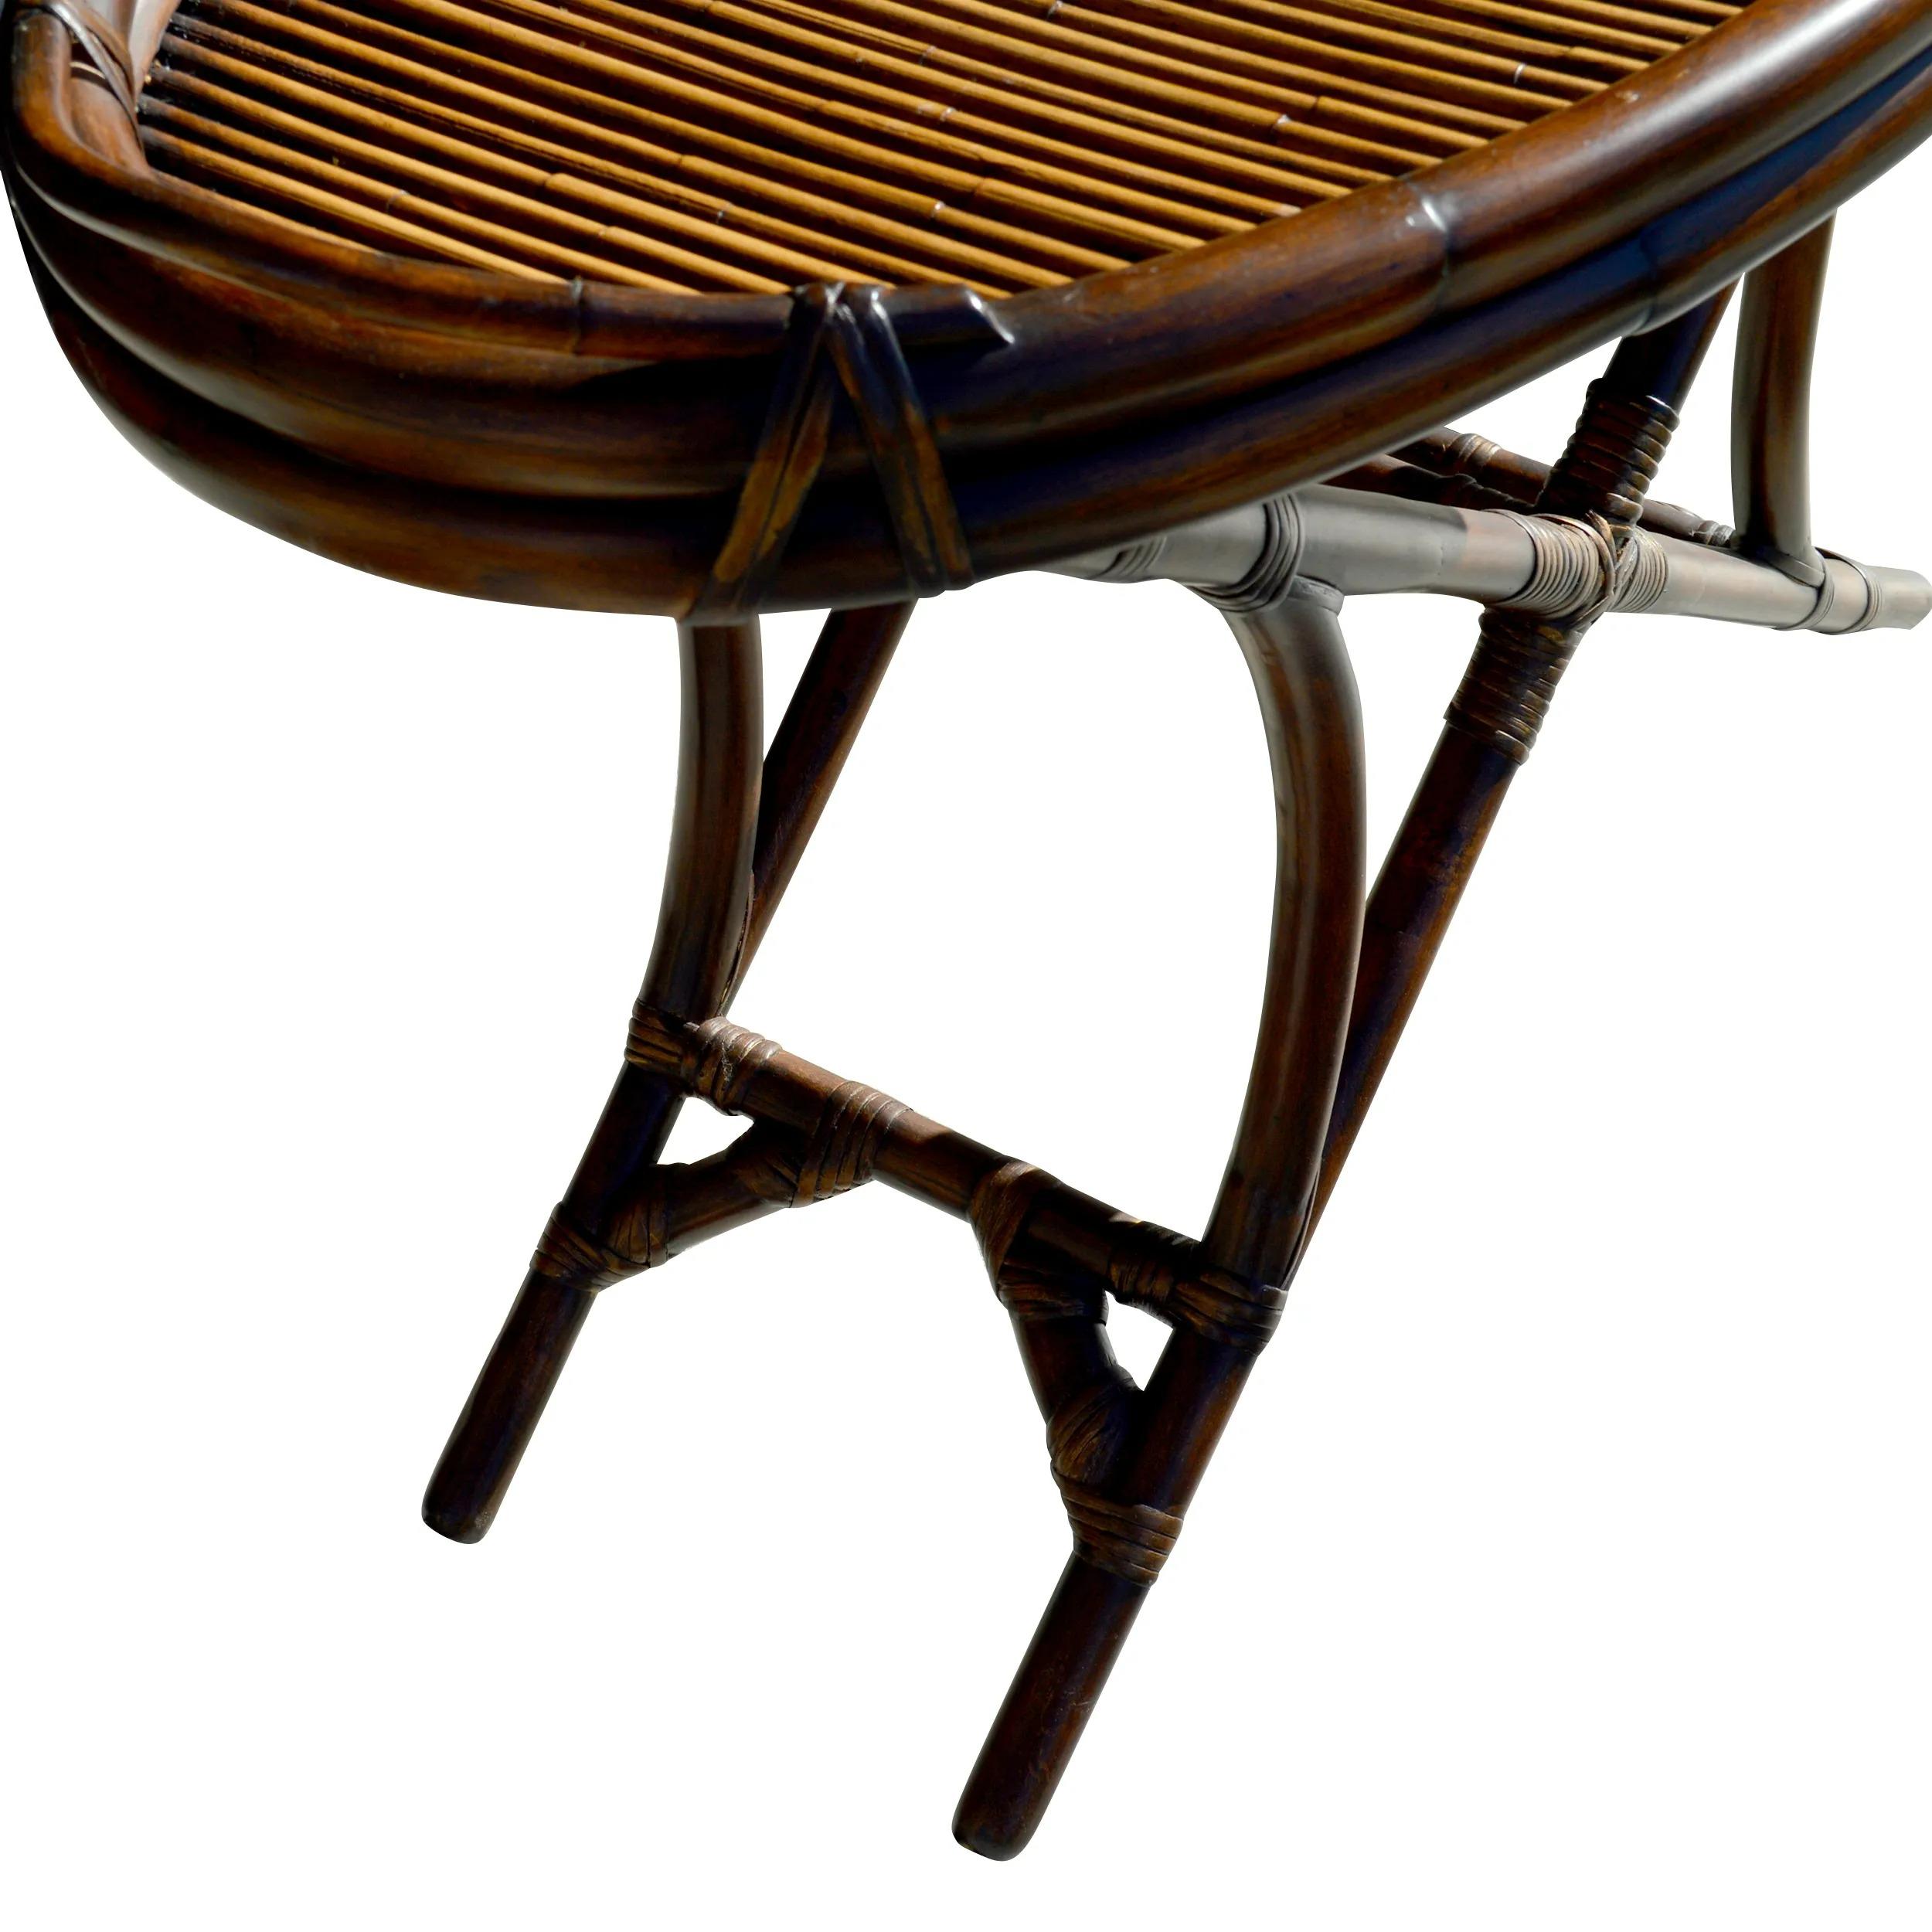 British Colonial Style Cane and Bamboo Tray Table 2